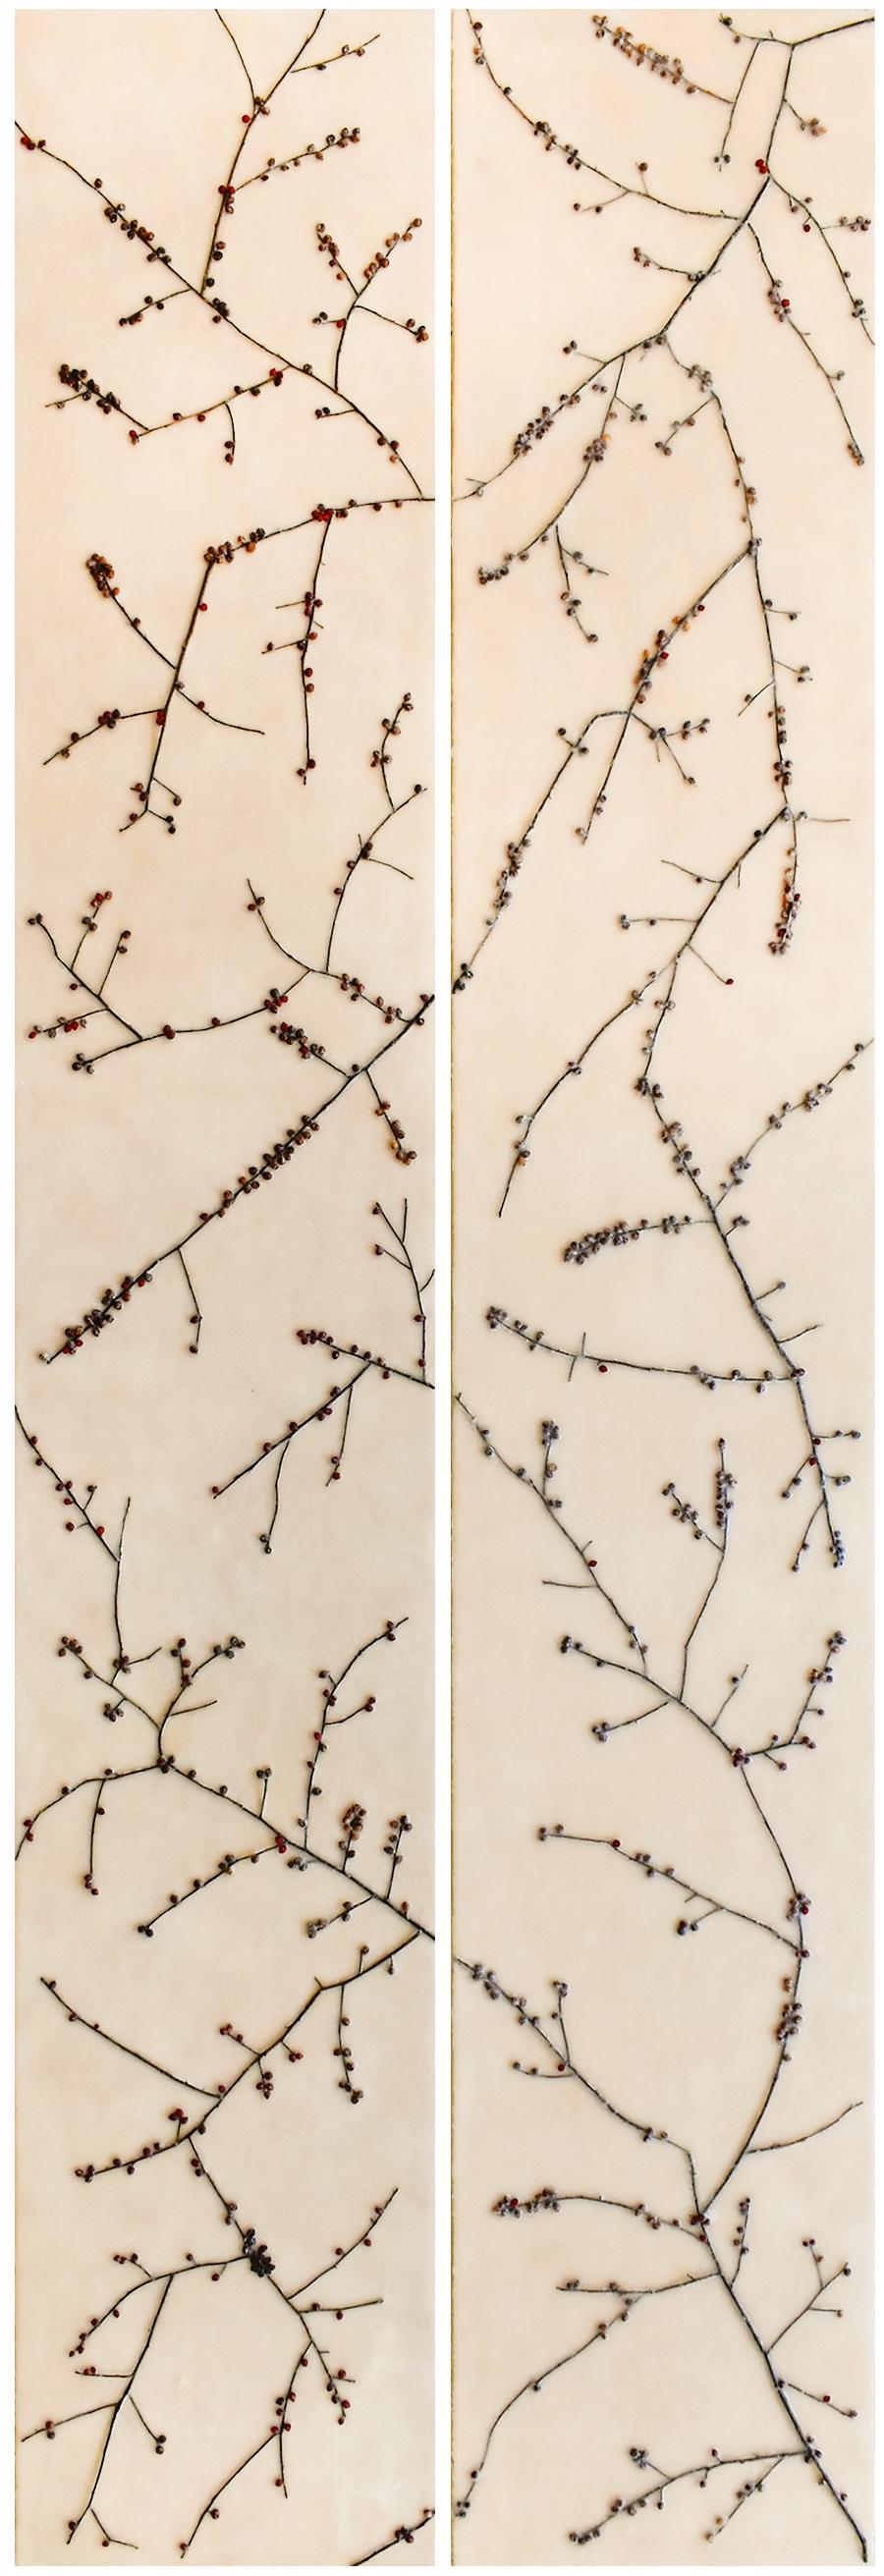 Abstract encaustic painting with brown branches with dark red berries against a light beige background
